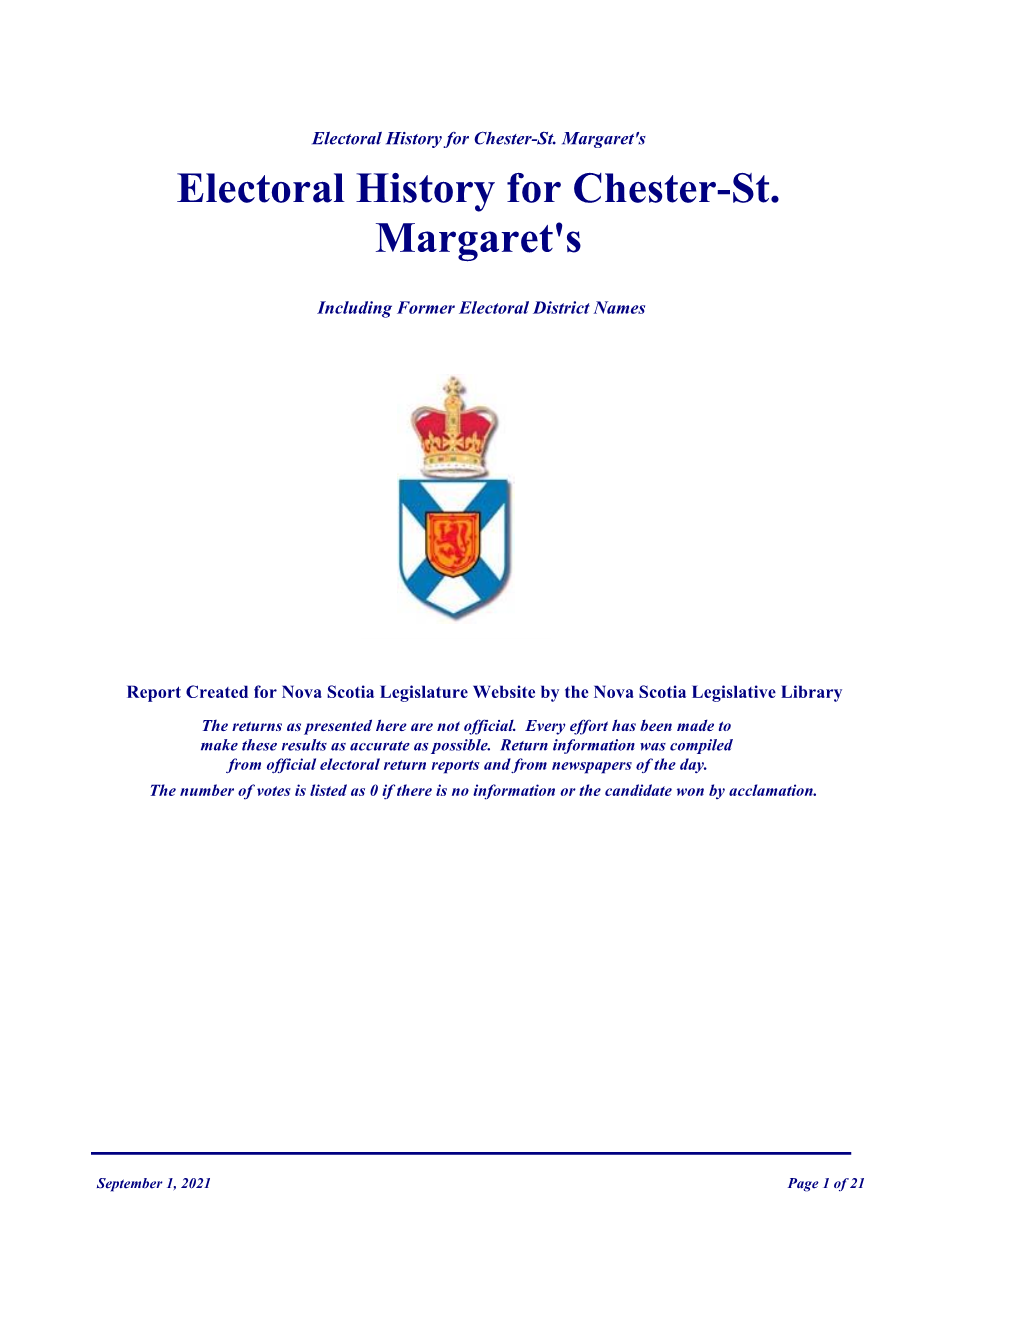 Chester-St. Margaret's Electoral History for Chester-St